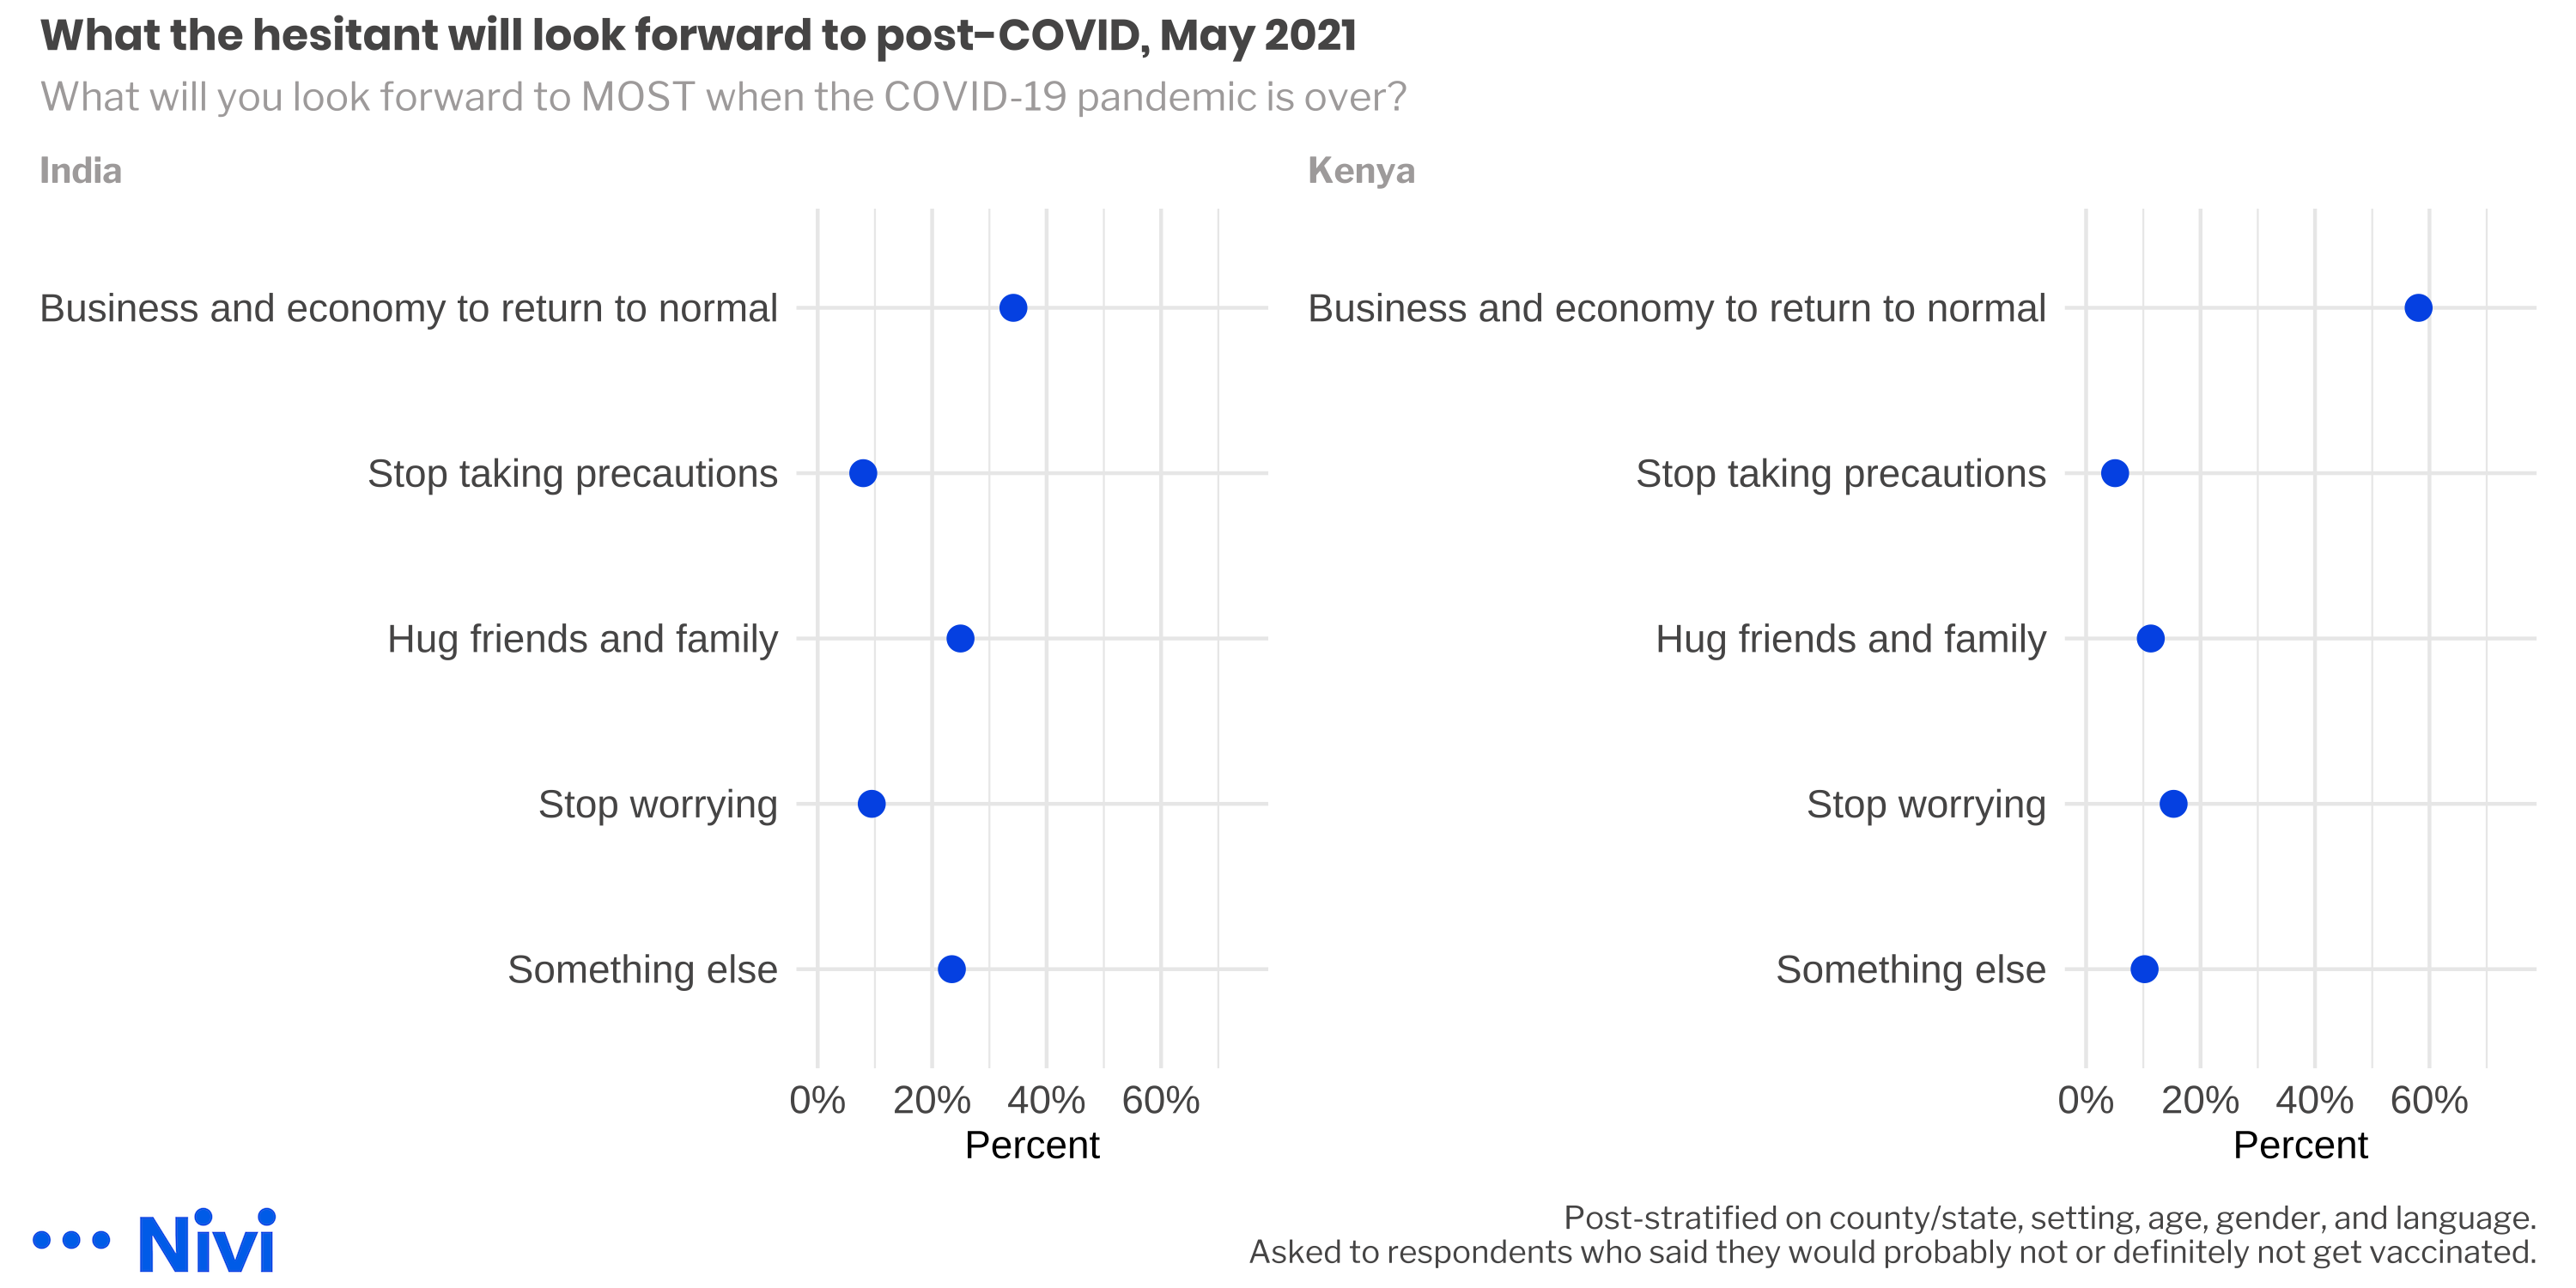 What the hesitant will look forward to post-COVID, May 2021